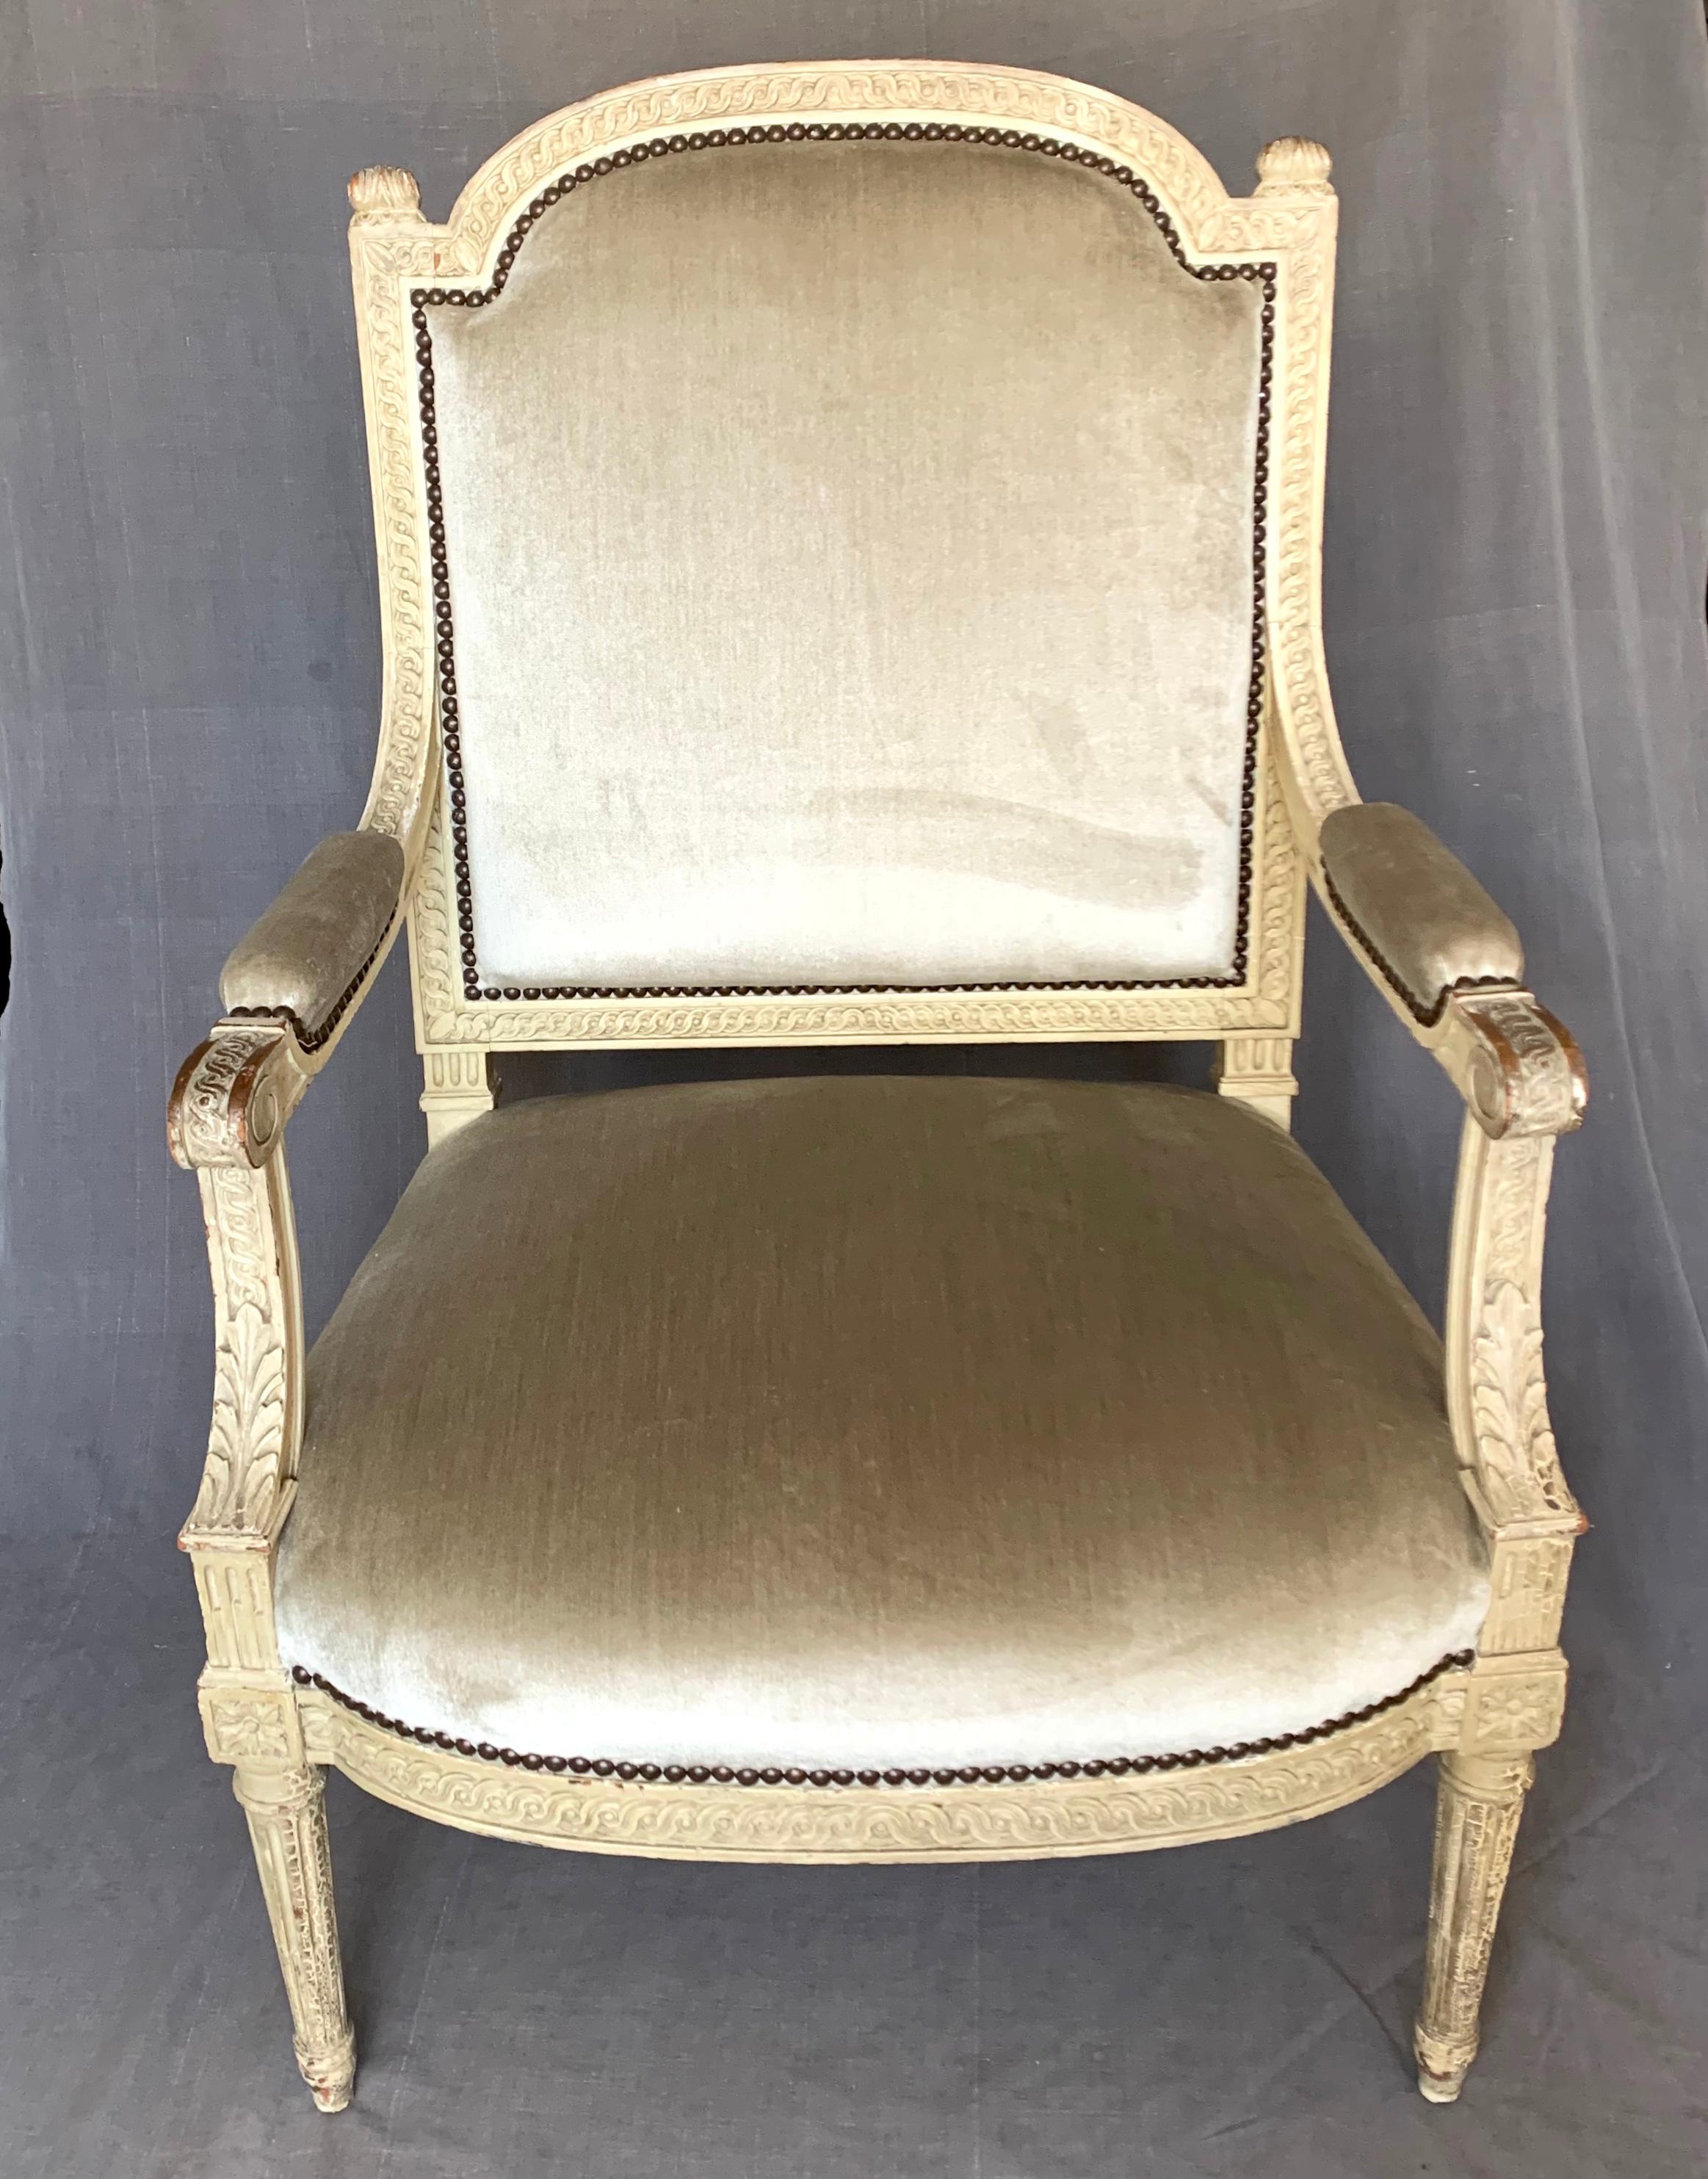 Louis XVI style armchair in camel silk velvet. Large vintage carved and painted wood open armchair / fauteuil in silvered camel silk velvet with grey silk taffeta back. Attributed to Jansen. Continental, first quarter of 20th century
Dimensions: